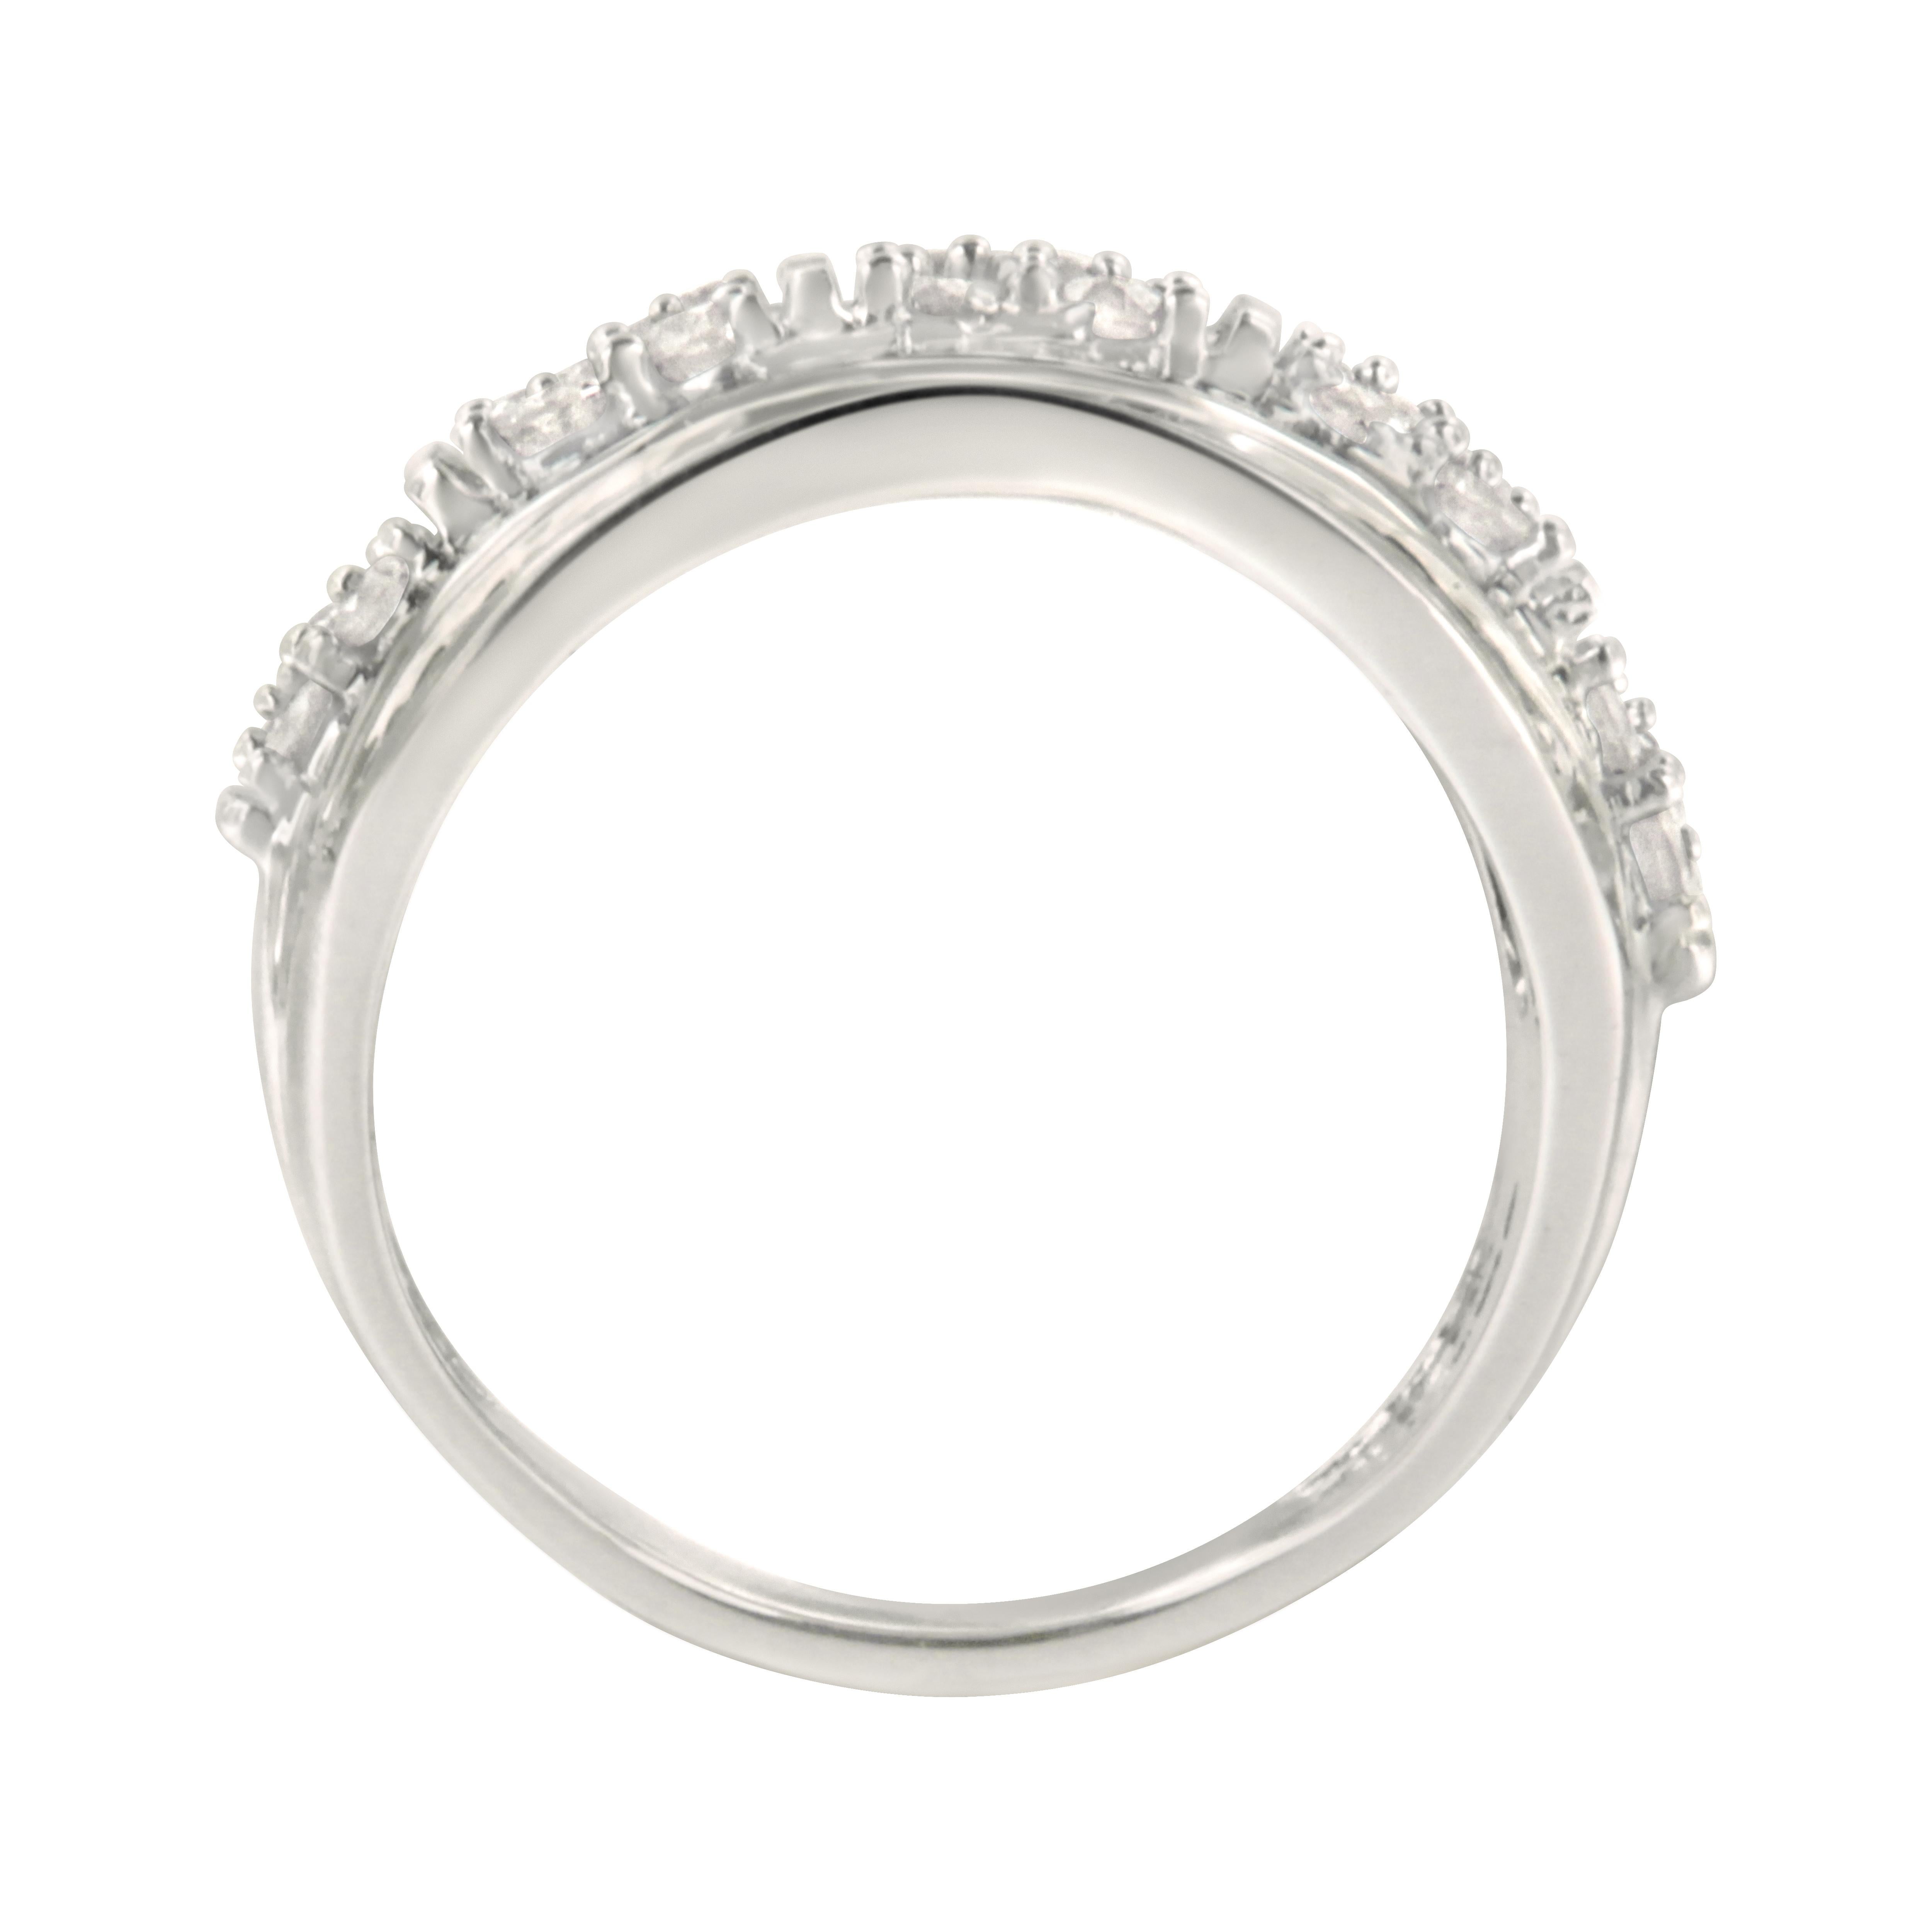 For Sale:  .925 Sterling Silver 2.0 Carat Diamond Multi-Row Tapered Cocktail Fashion Ring 4